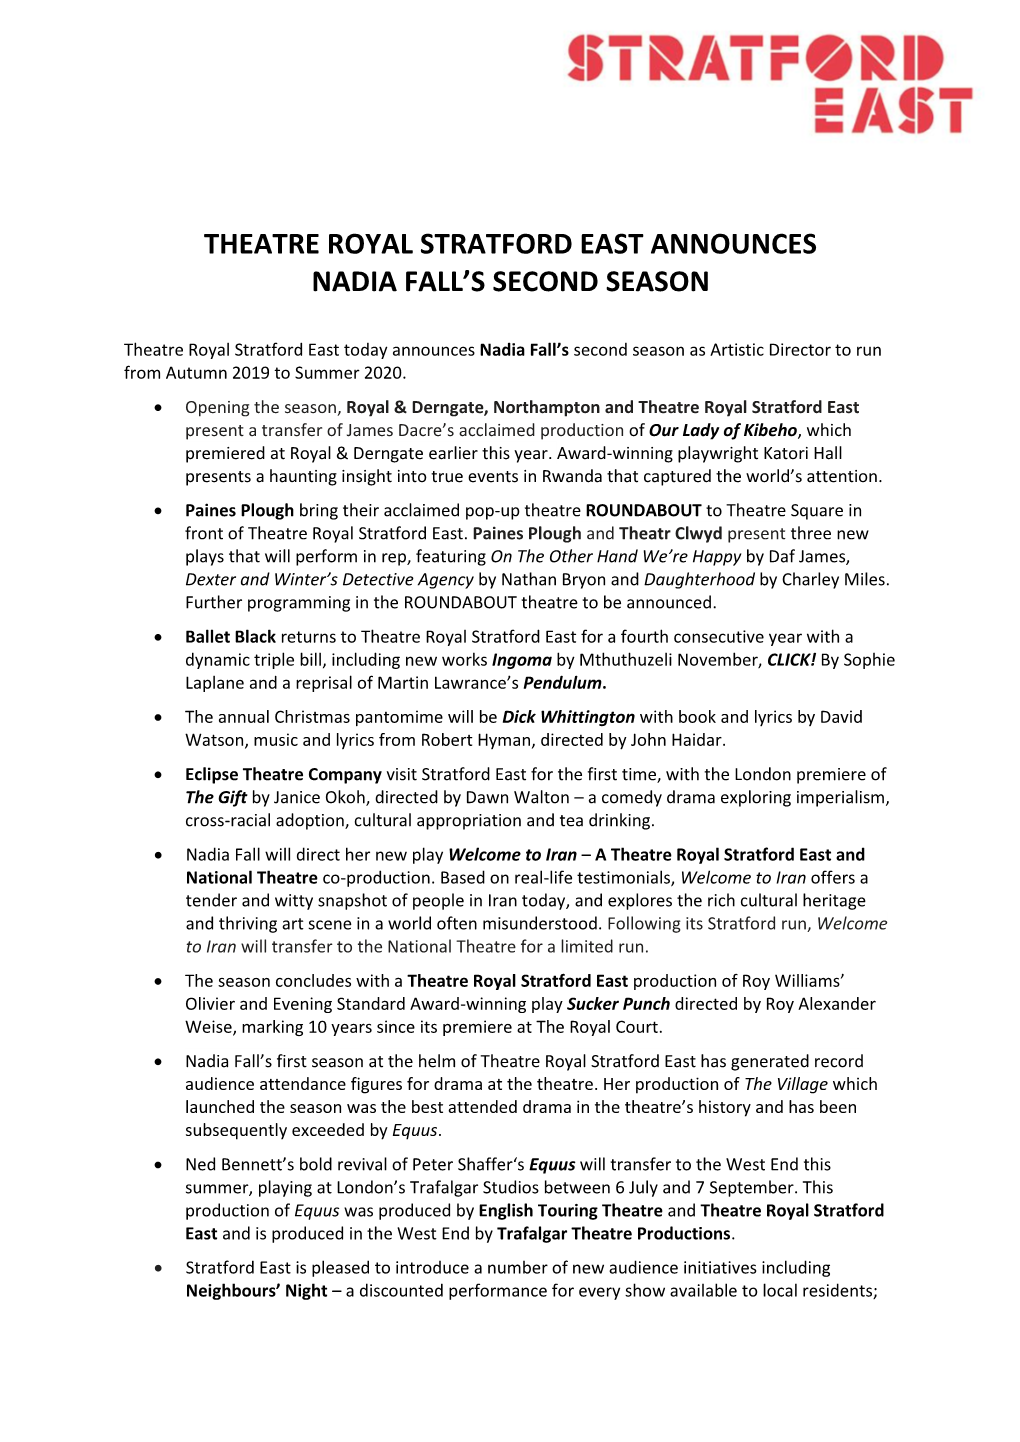 Theatre Royal Stratford East Announces Nadia Fall's